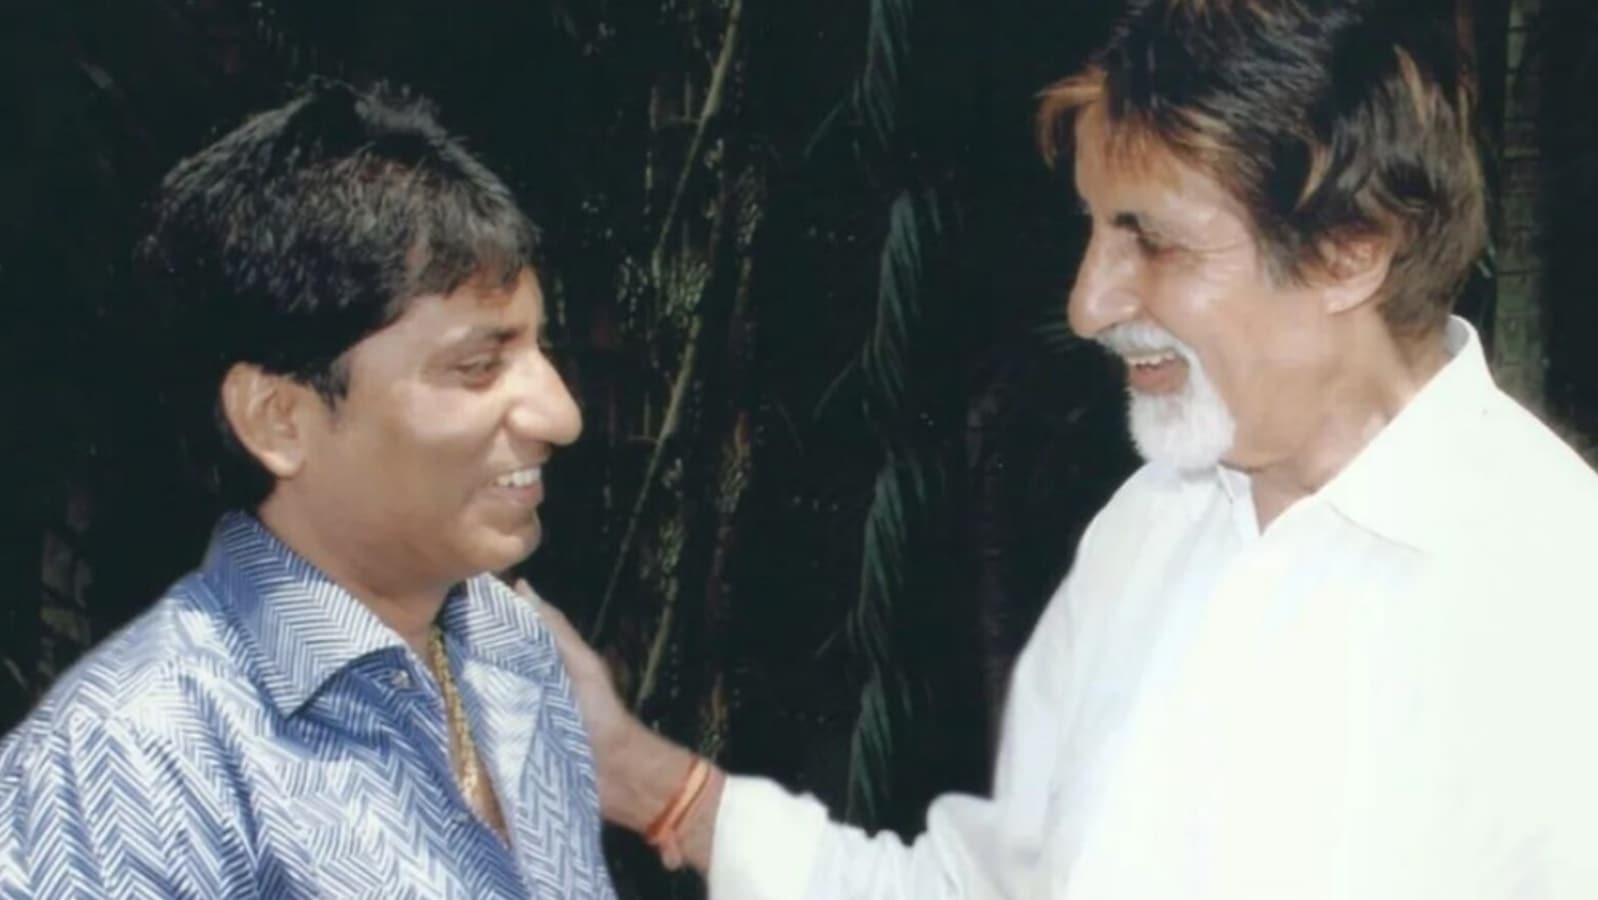 raju-srivastava-s-family-pens-thank-you-note-to-amitabh-bachchan-for-his-voice-note-saved-your-number-as-guru-ji